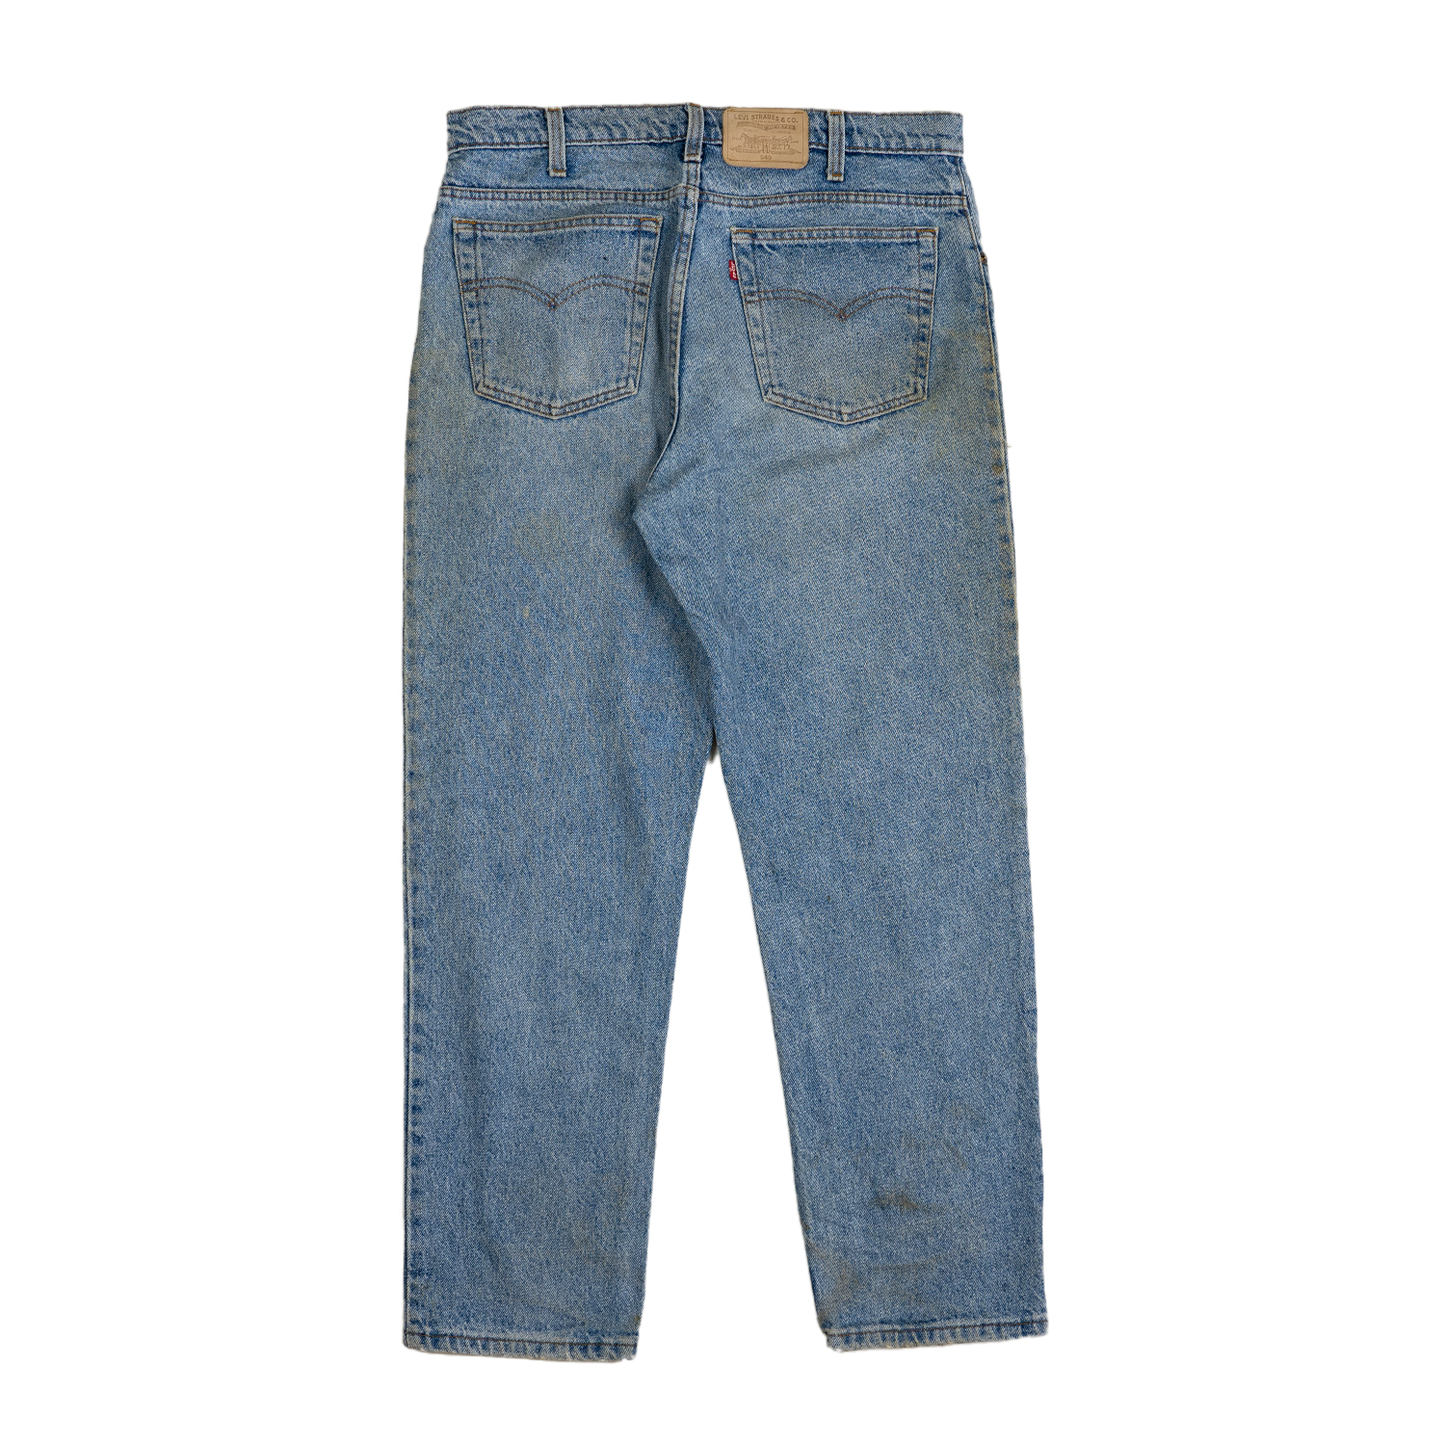 Levi's 540 Red Tab Jeans - 90s